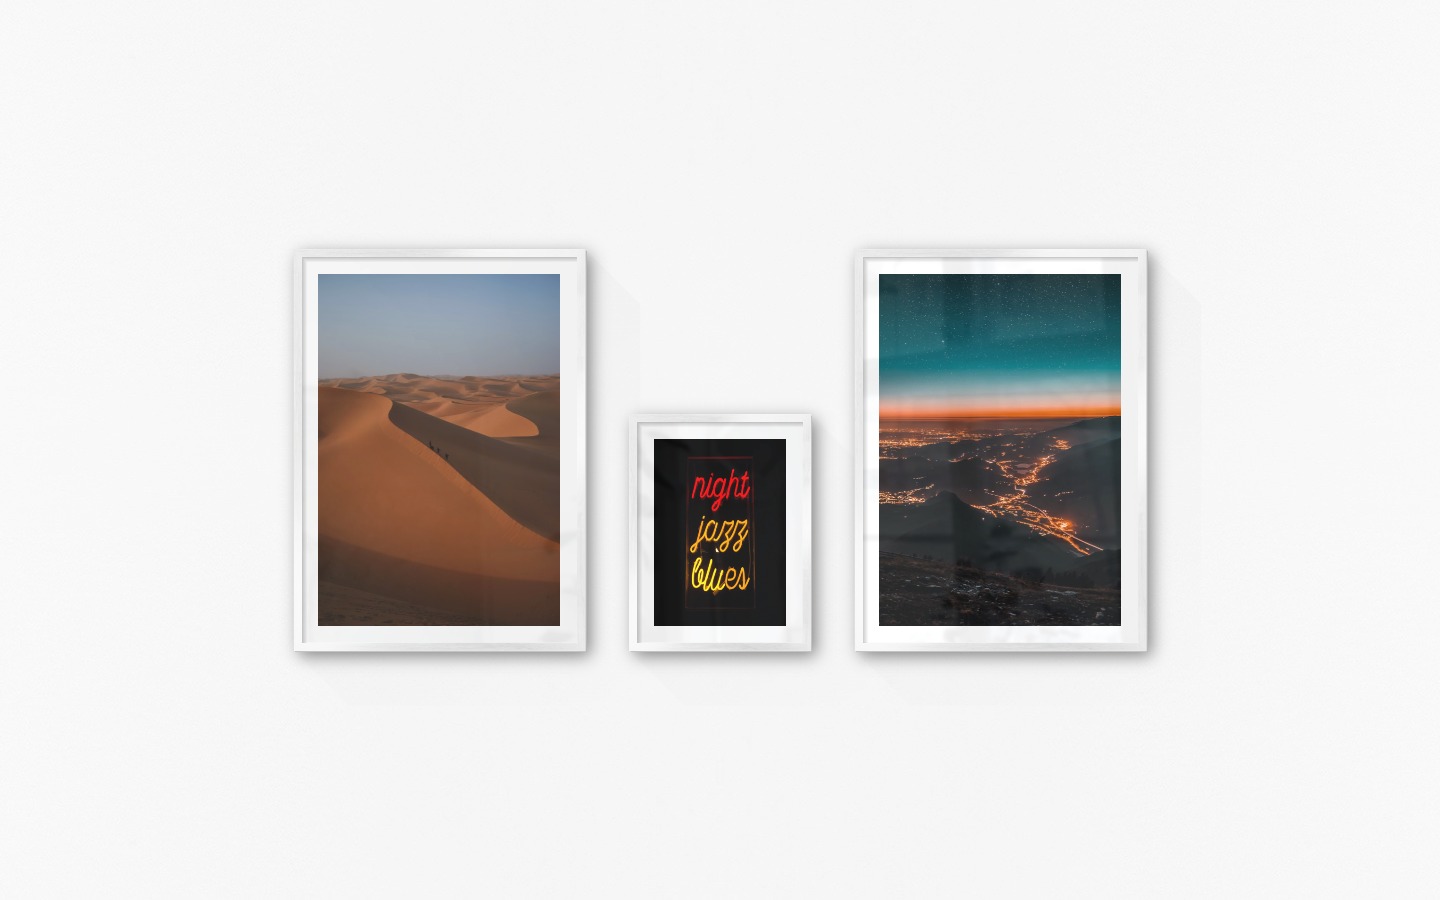 Gallery wall with picture frames in silver in sizes 50x70 and 30x40 with prints "Desert", "Neon signs" and "City lights on mountains"